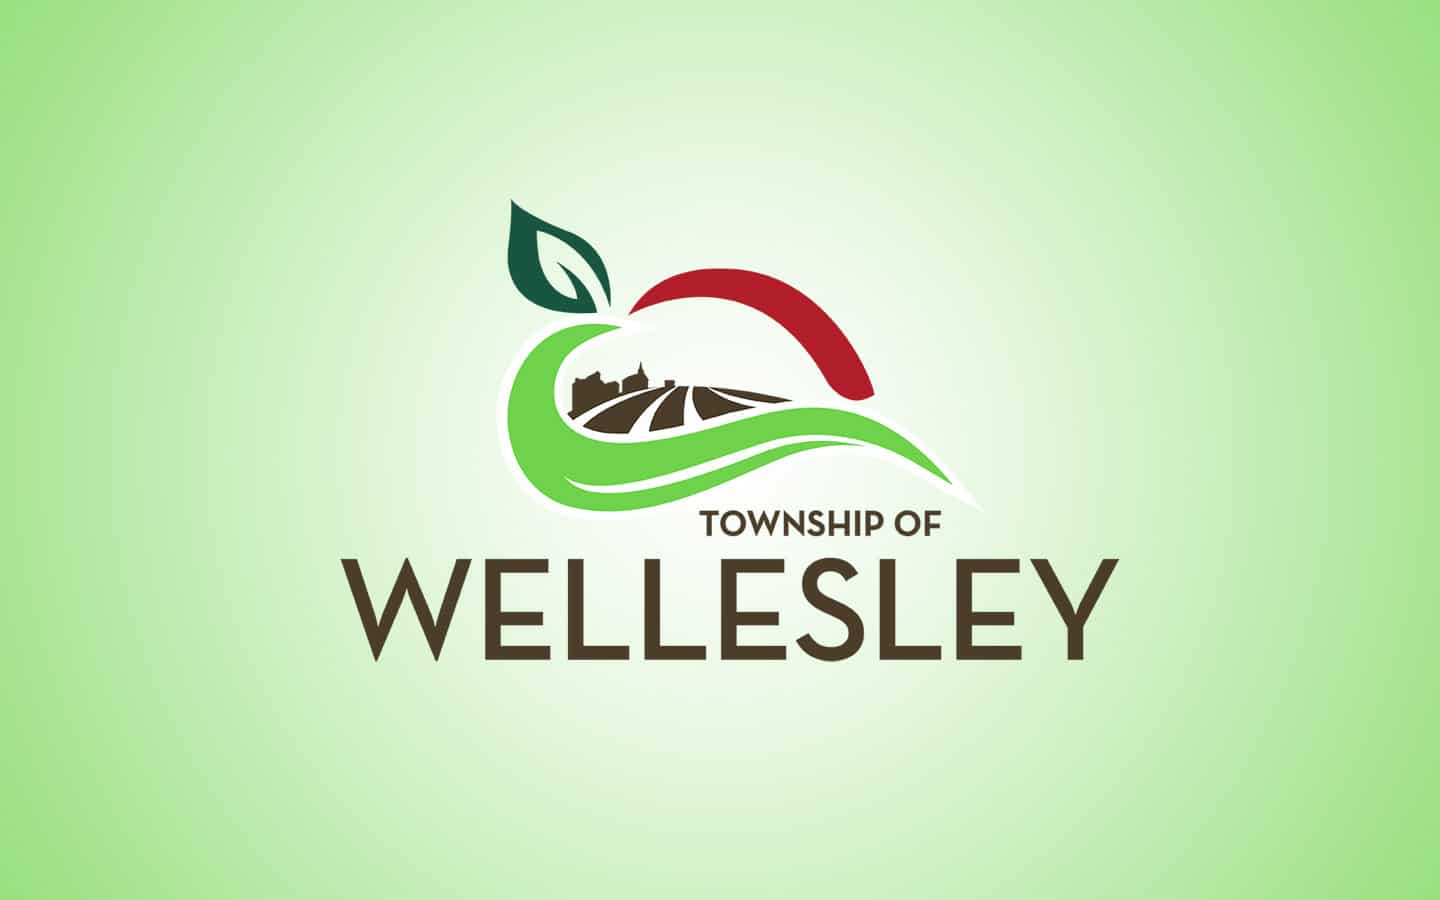 Wellesley announces program to give away trees to residents